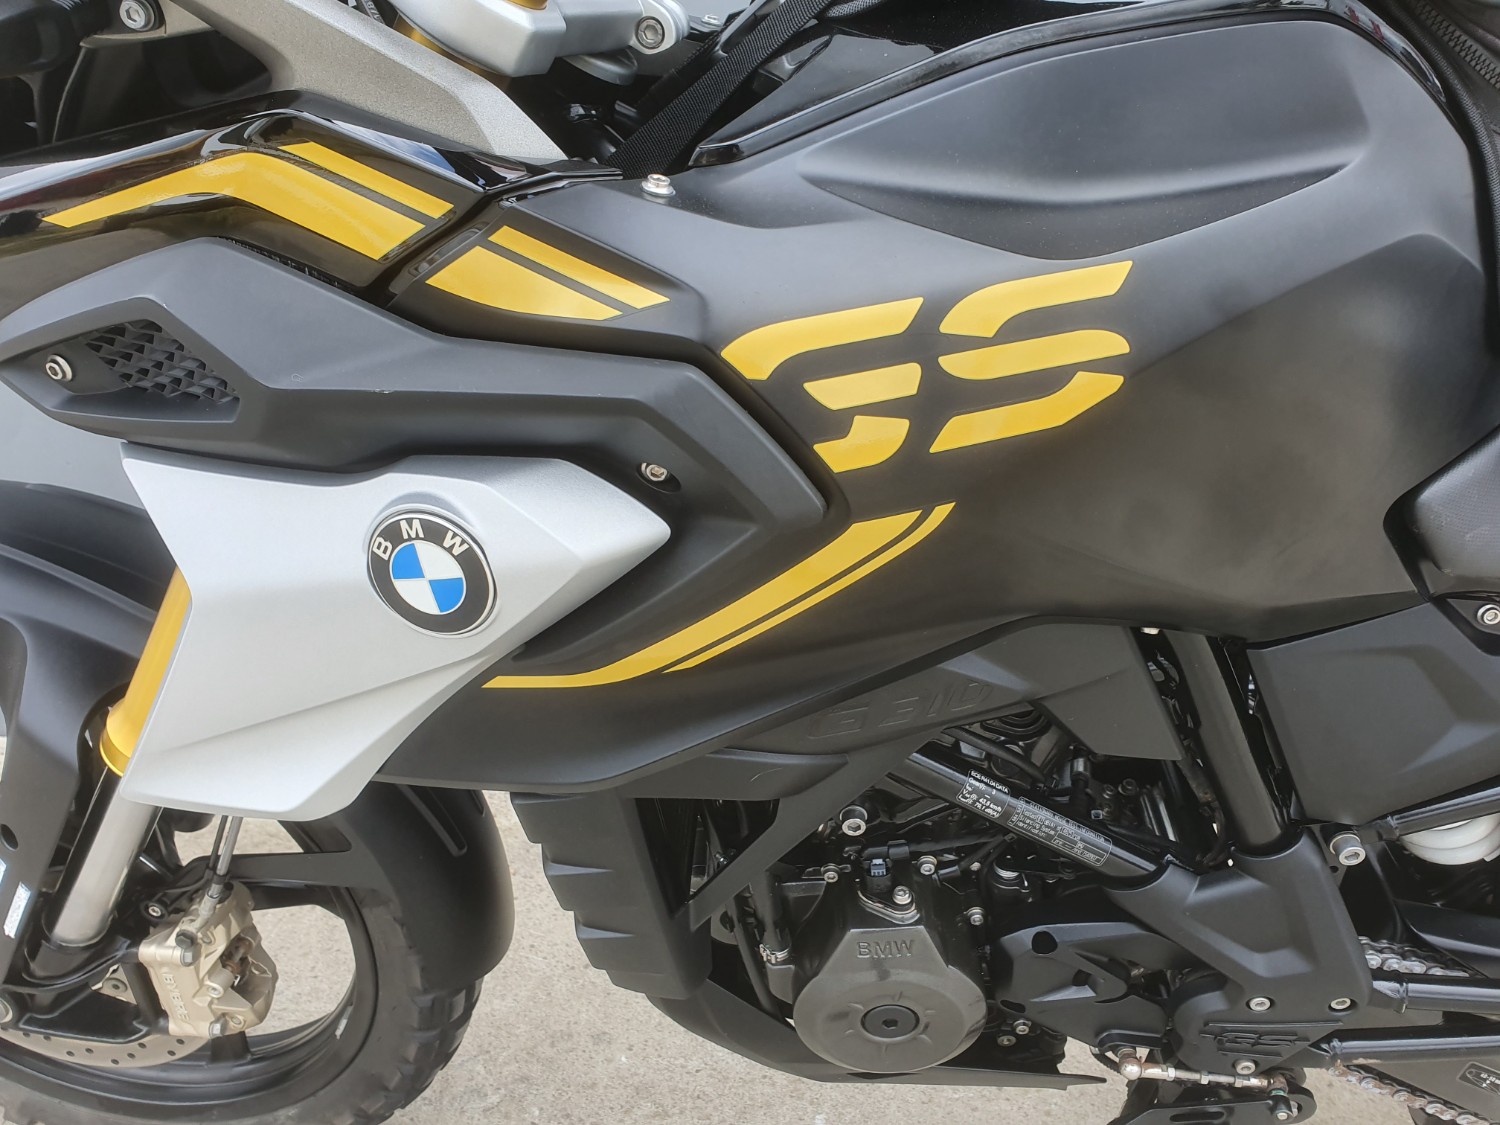 2021 BMW G 310 GS Motorcycle Image 12